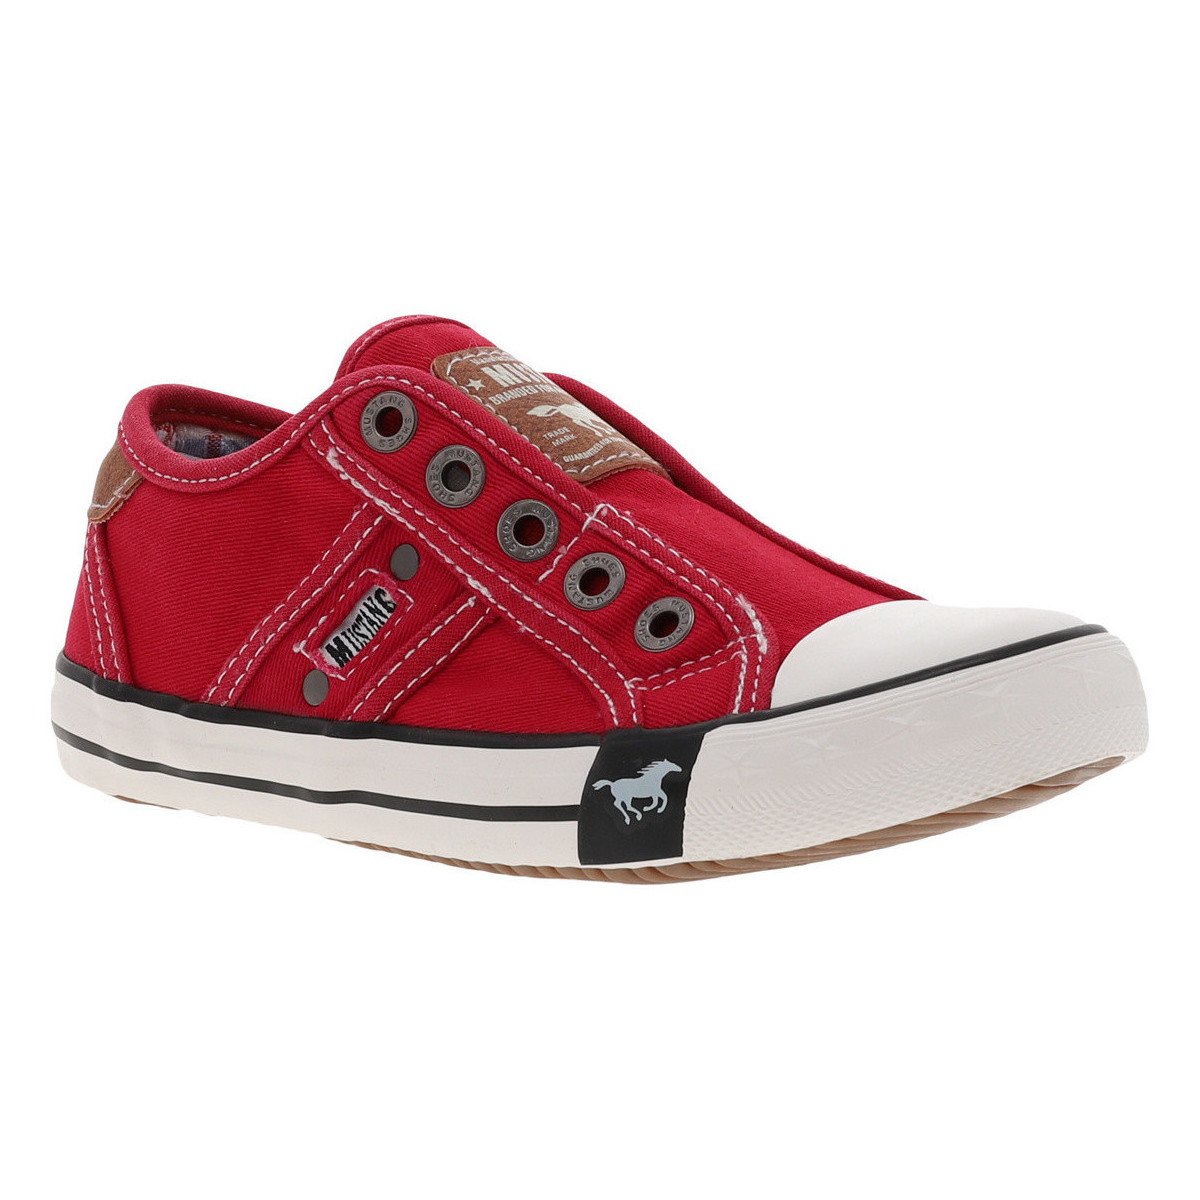 Chaussures Enfant Baskets basses Mustang 5803-405 Rouge